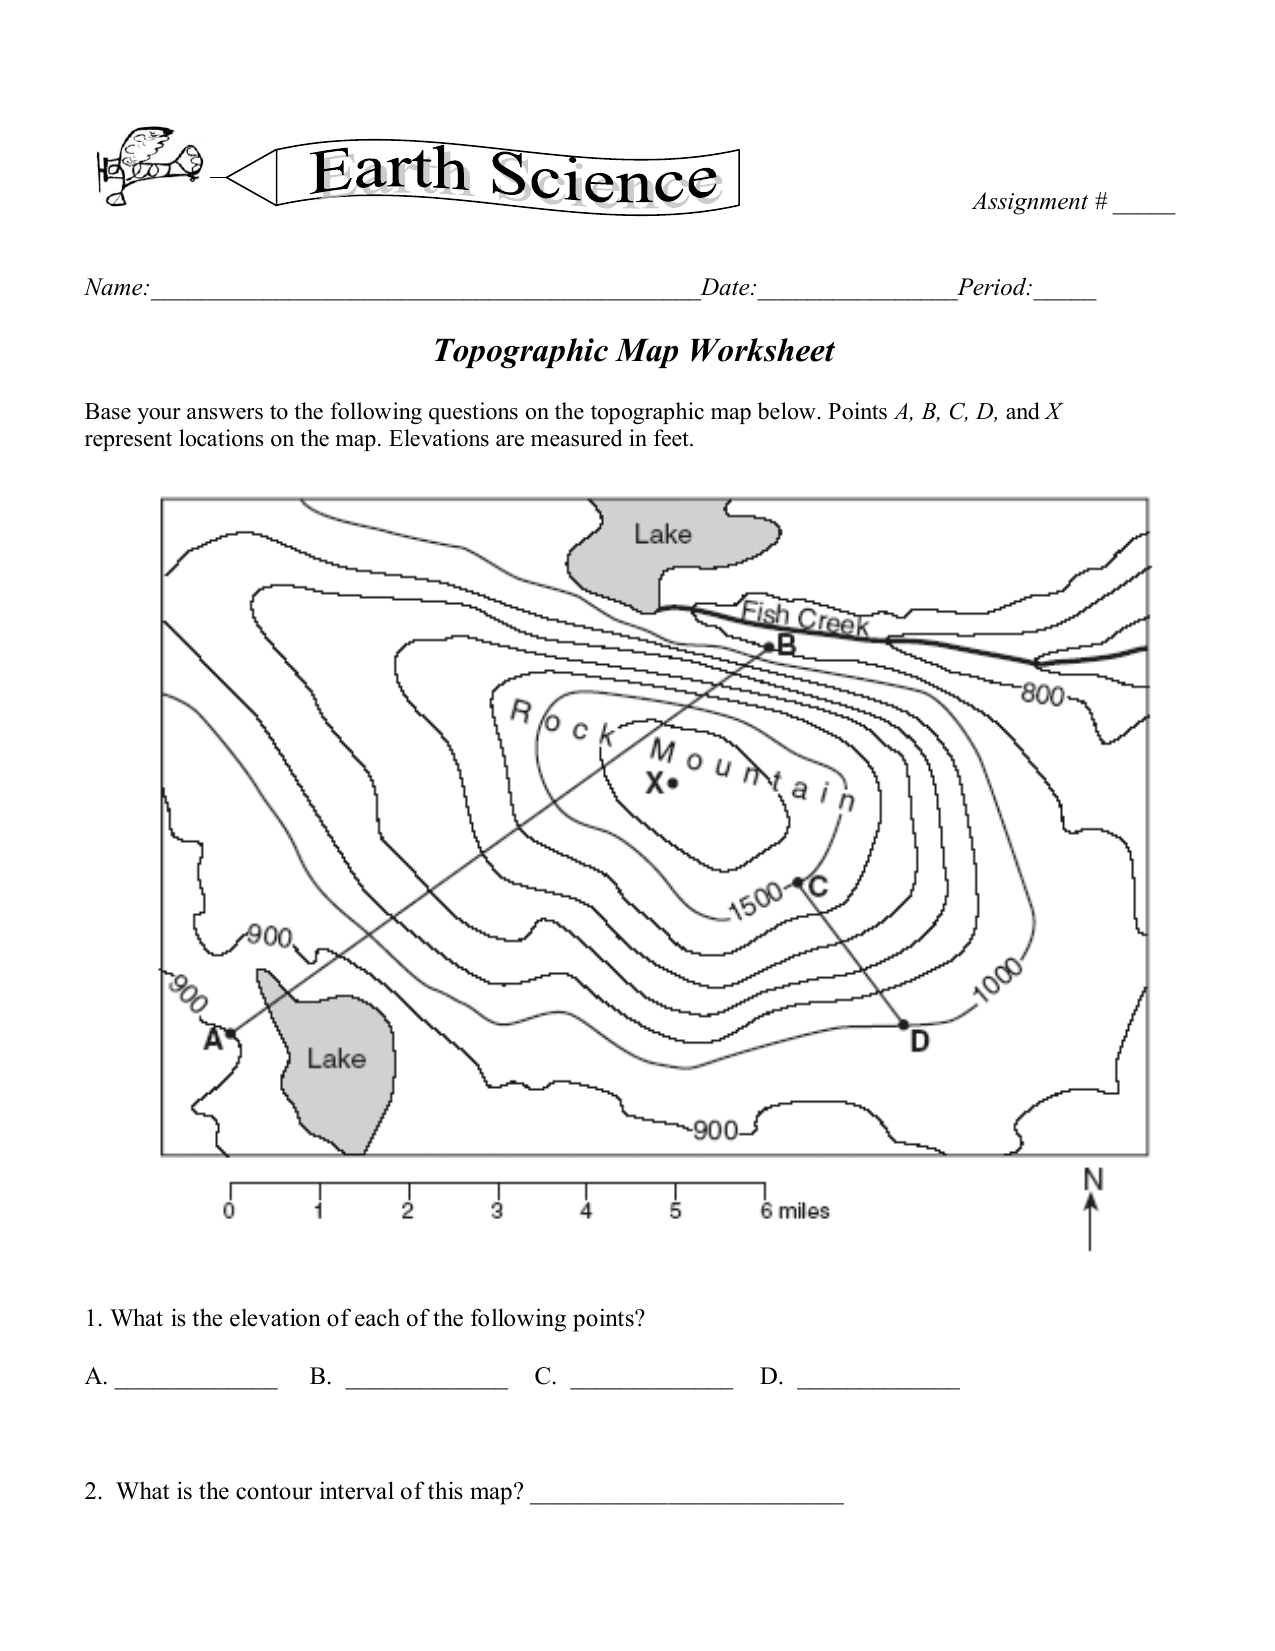 Earth Science Topographic Map Worksheet Answer Key Chart Sheet Gallery